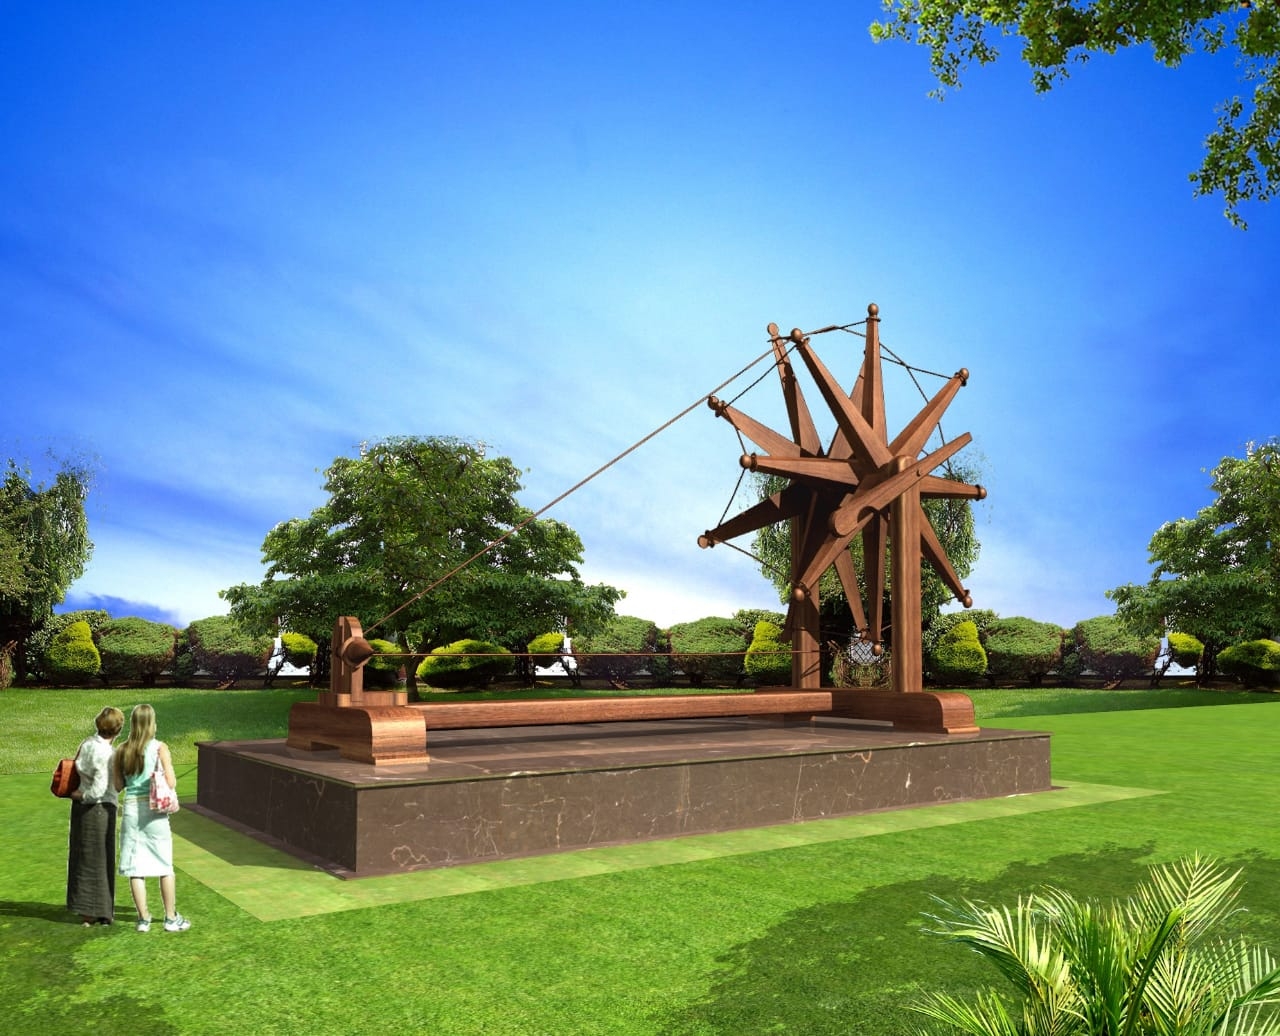 An artists impression of world's biggest 'charkha' or spinning wheel that will be unveiled outside Sevagram Ashram complex on Mahatma Gandhi's 150th birth anniversary in Wardha, Maharashtra. The approximately 31-feet X 19-feet charkha will be bigger than that installed at the Delhi airport. by .